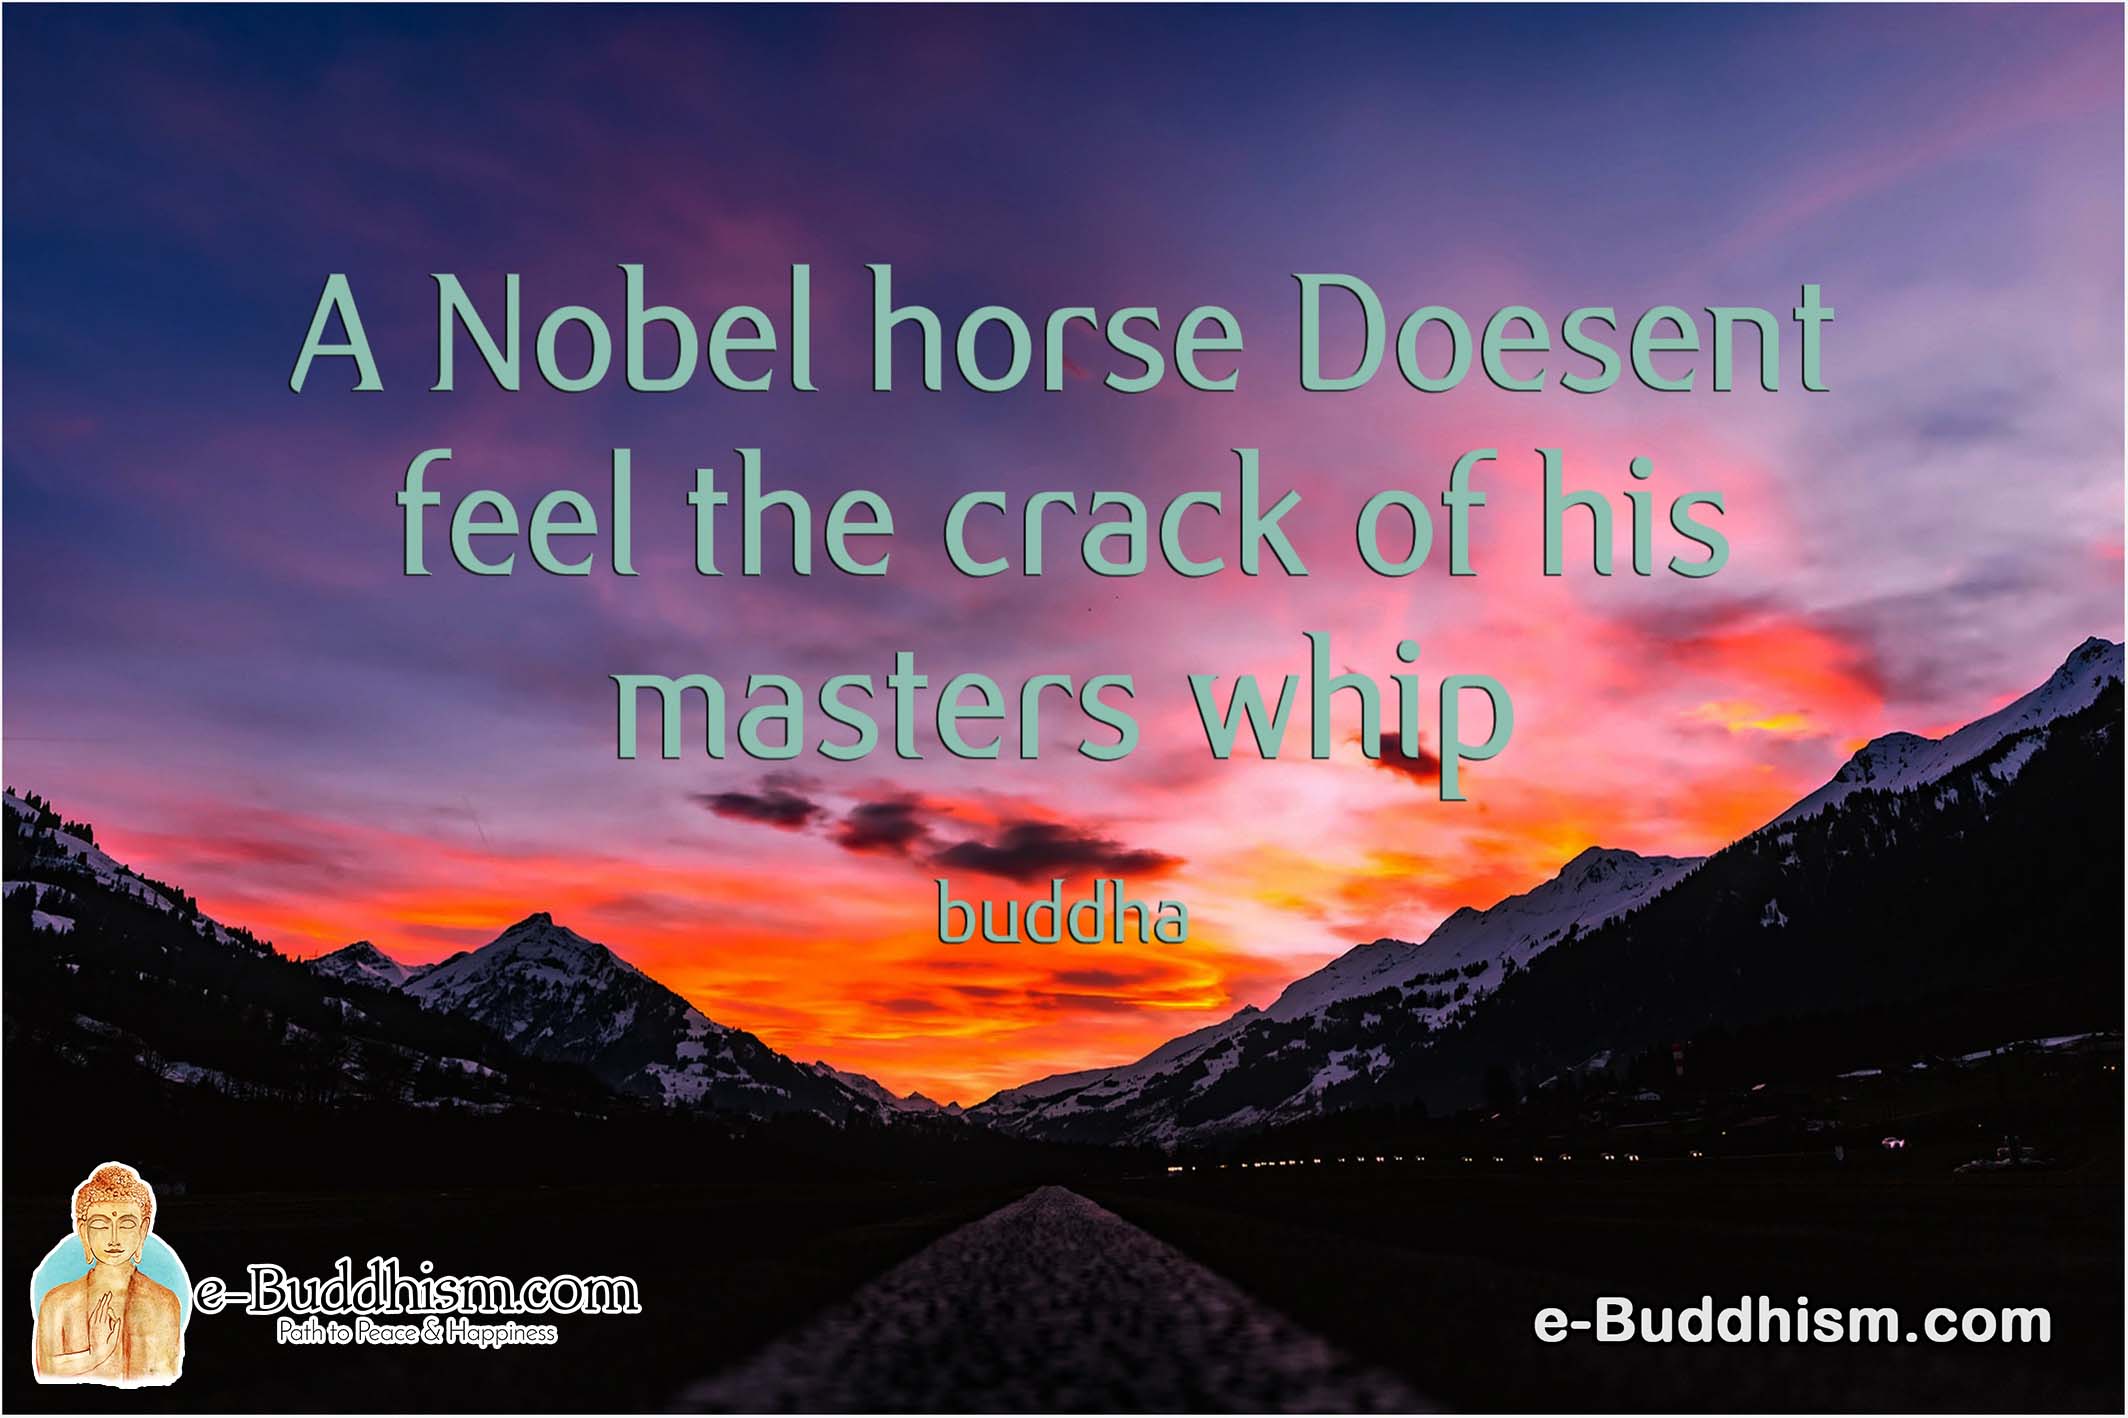 A noble horse doesn't feel the cracks of his master whip. -Buddha